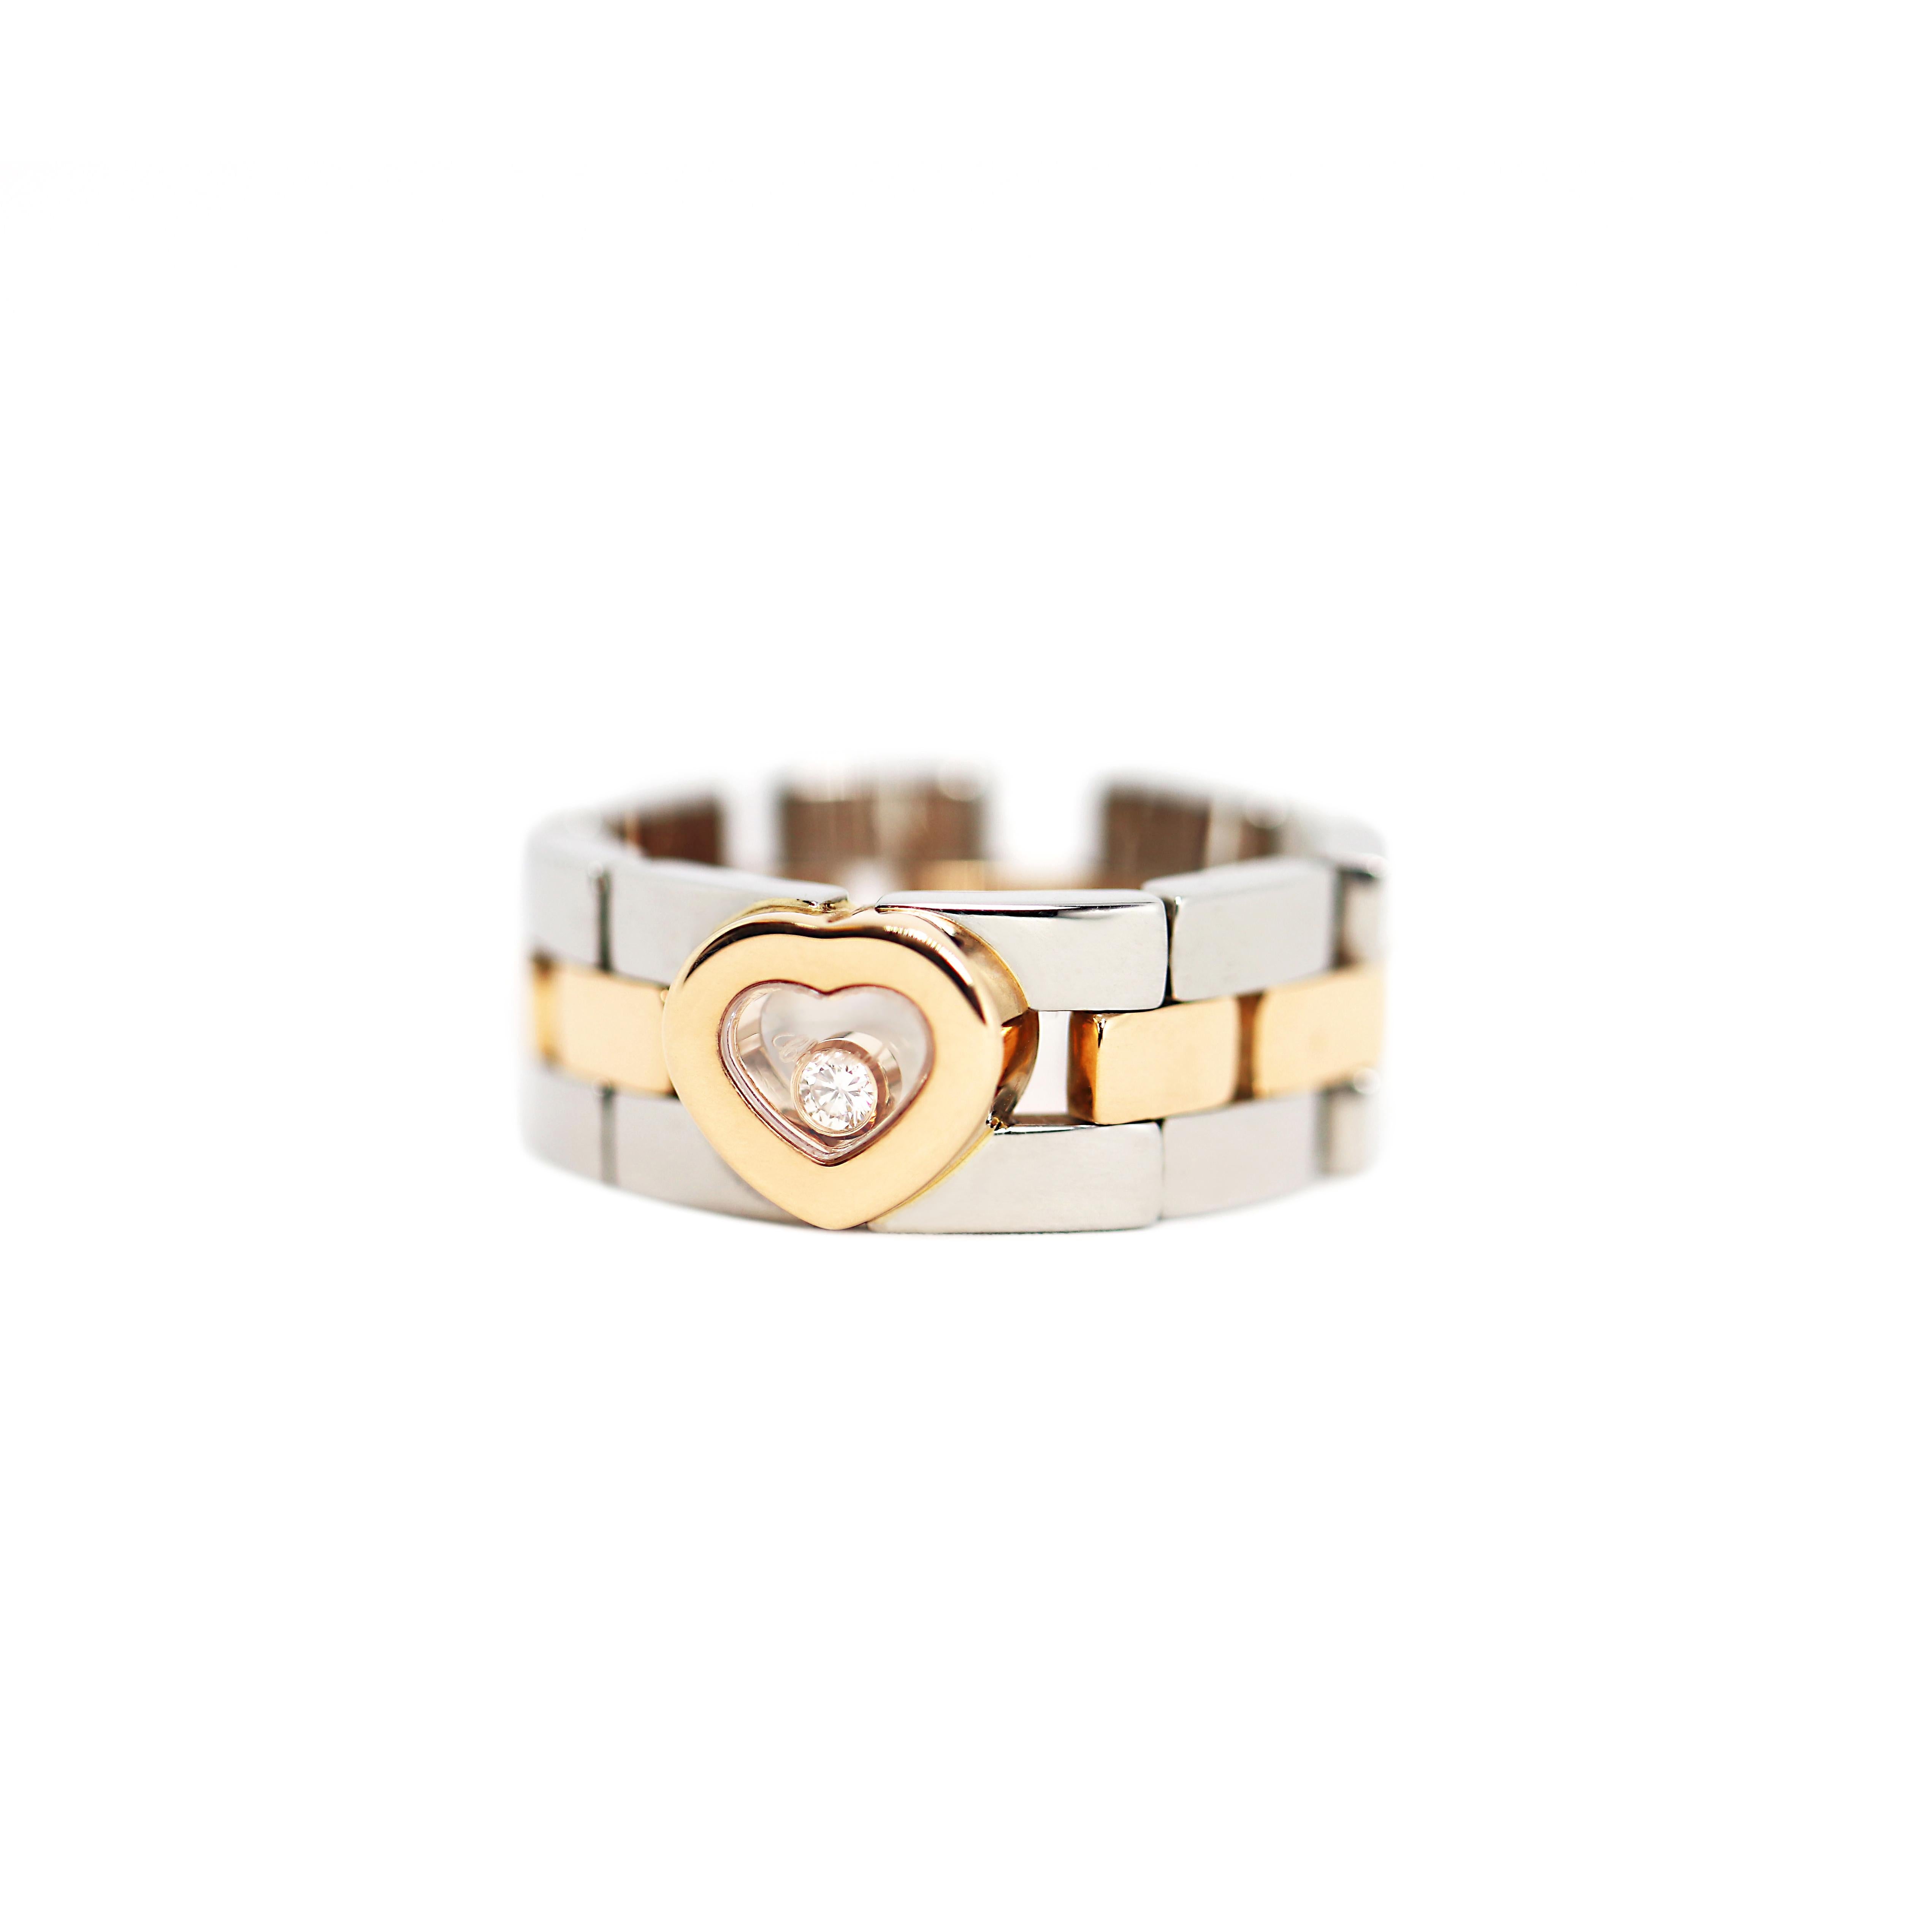 From Chopard’s famous Happy Diamonds collection, this panther link flex band ring has been beautifully crafted from stainless steel and 18 carat rose gold. This beautiful piece features a floating round brilliant cut diamond encased in a rose gold